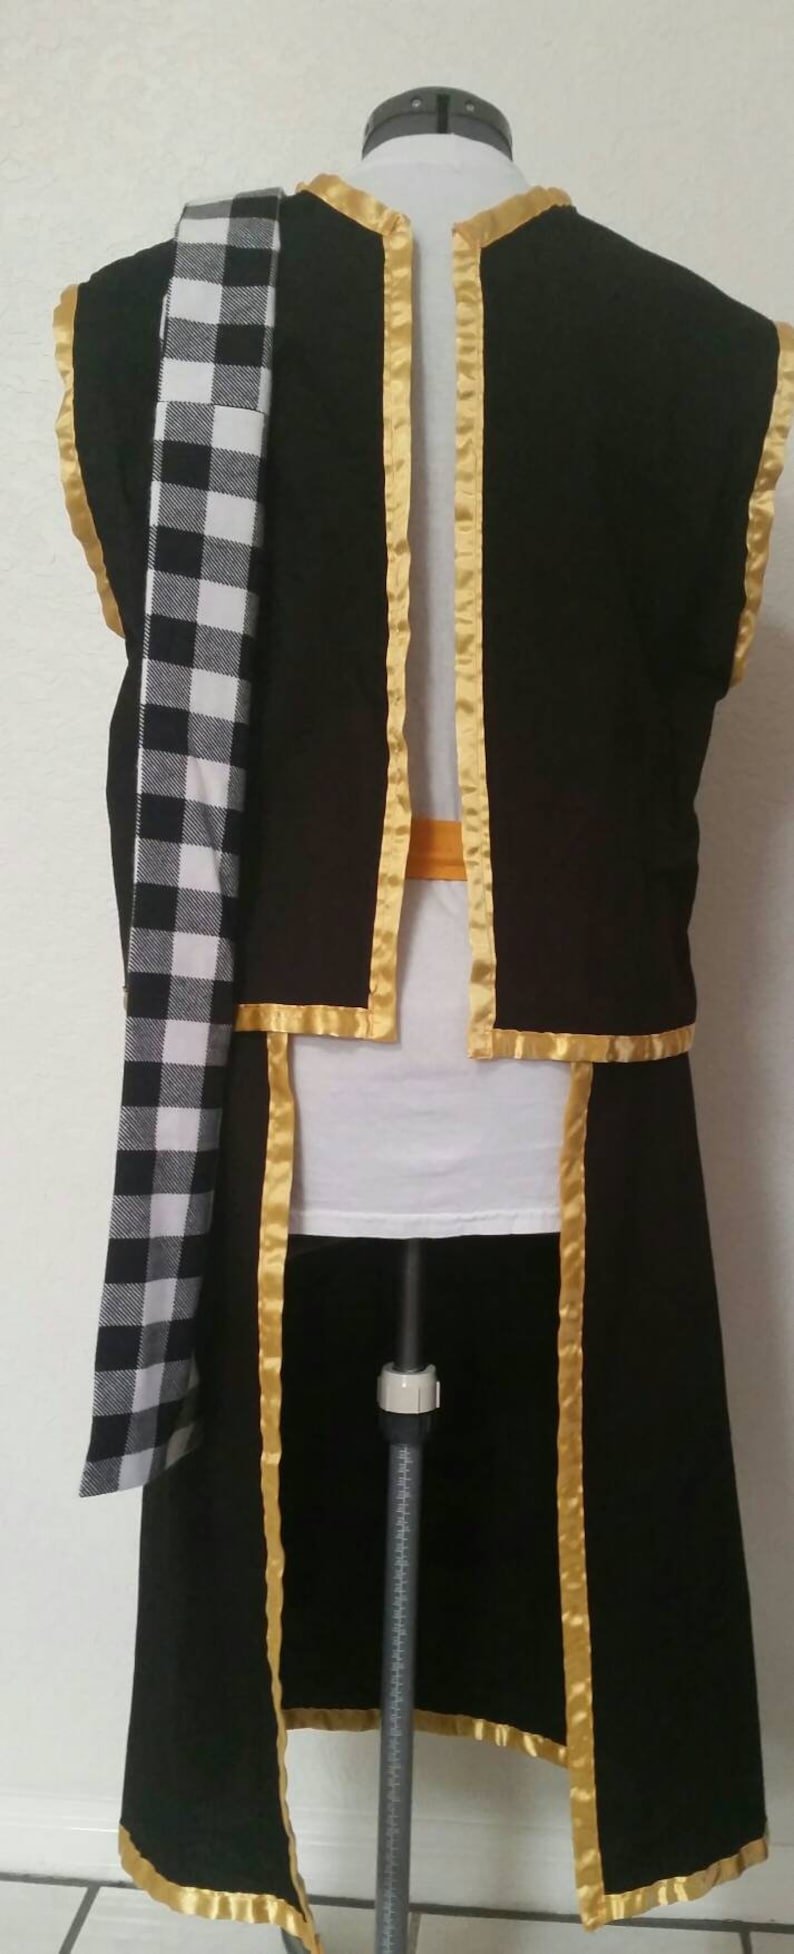 Natsu Fairytail Cosplay outfit